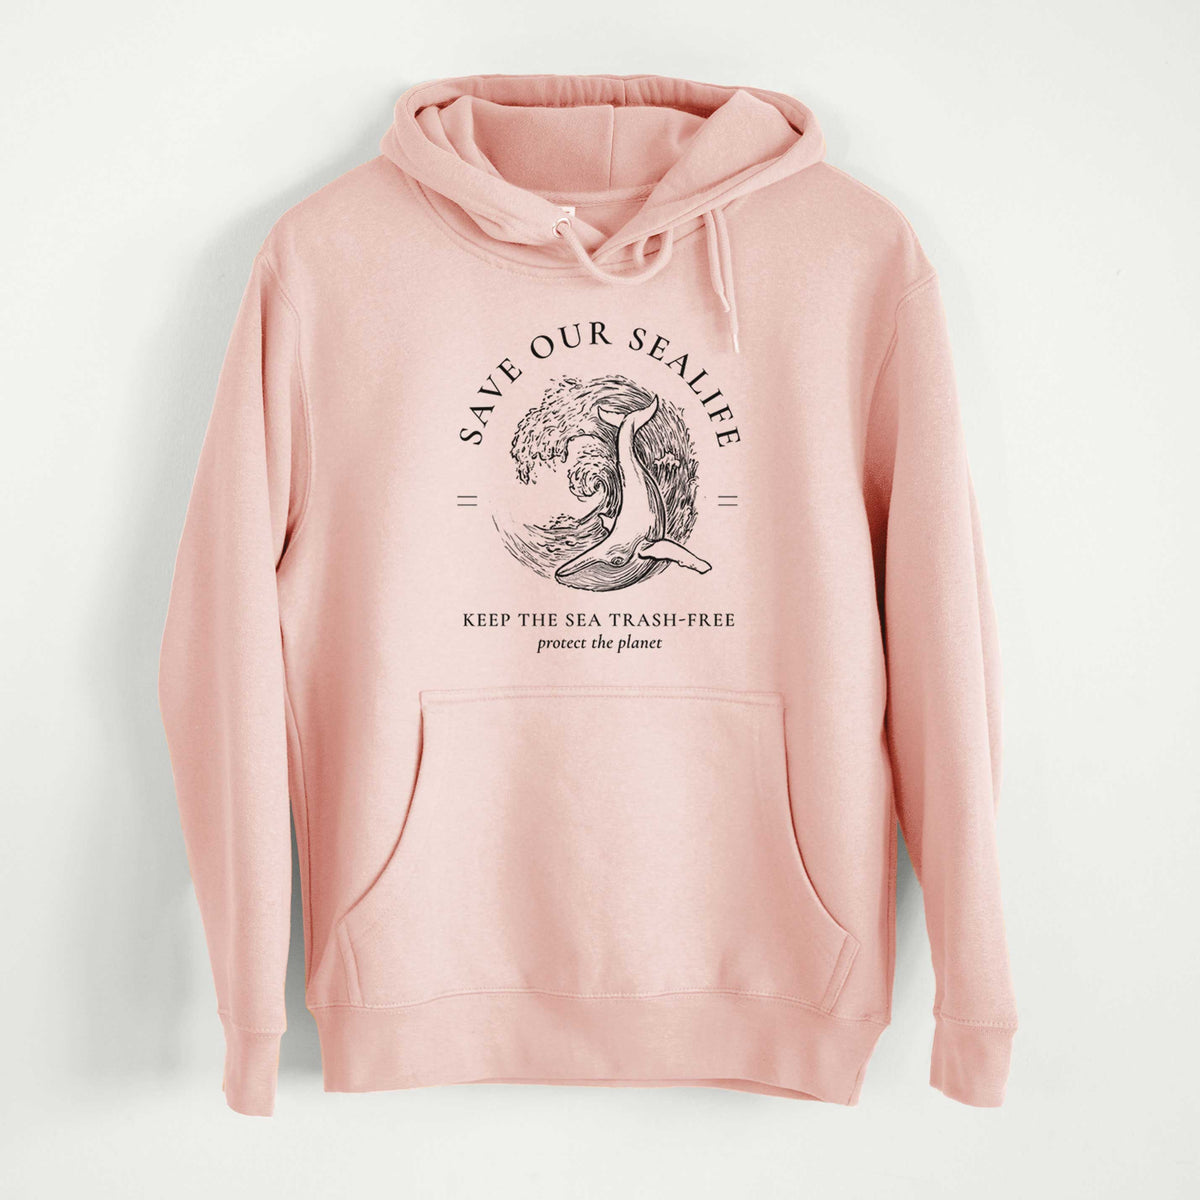 Save our Sealife - Keep the Sea Trash-Free  - Mid-Weight Unisex Premium Blend Hoodie